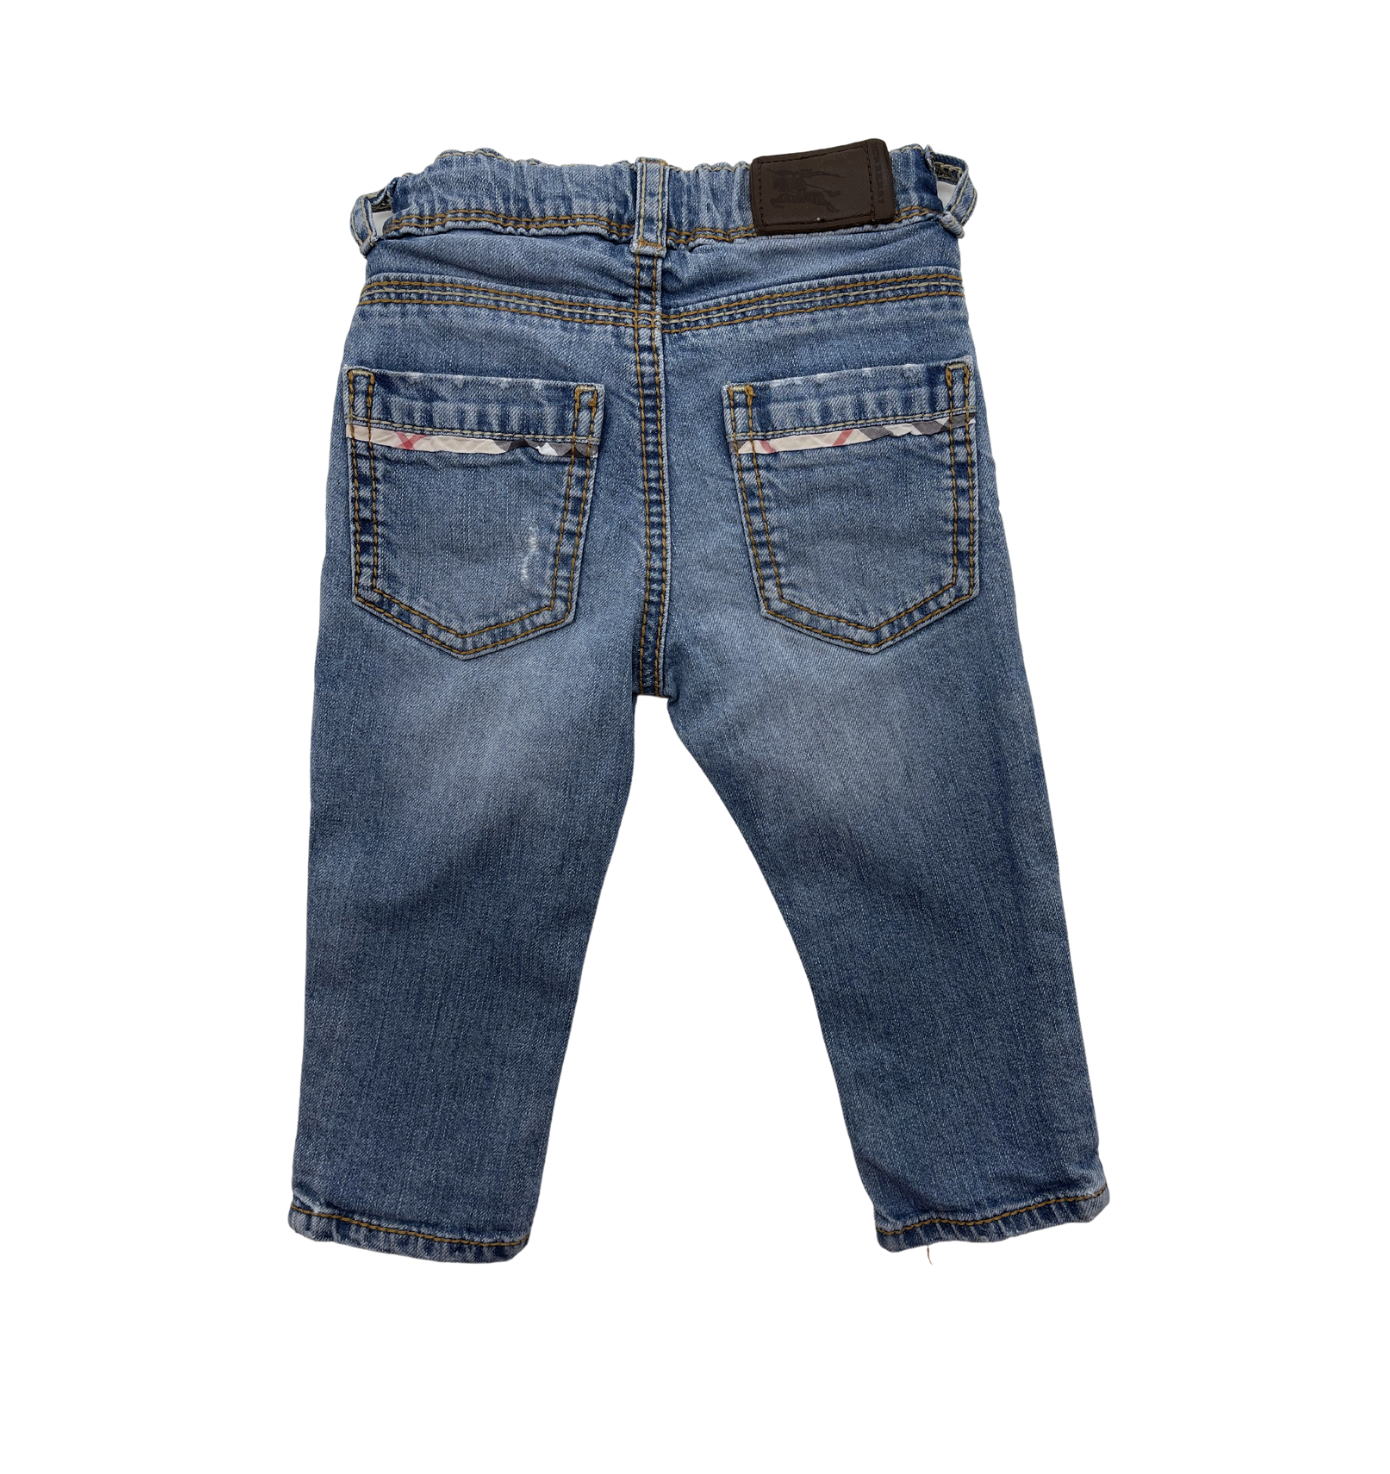 BURBERRY - Jeans - 6 months